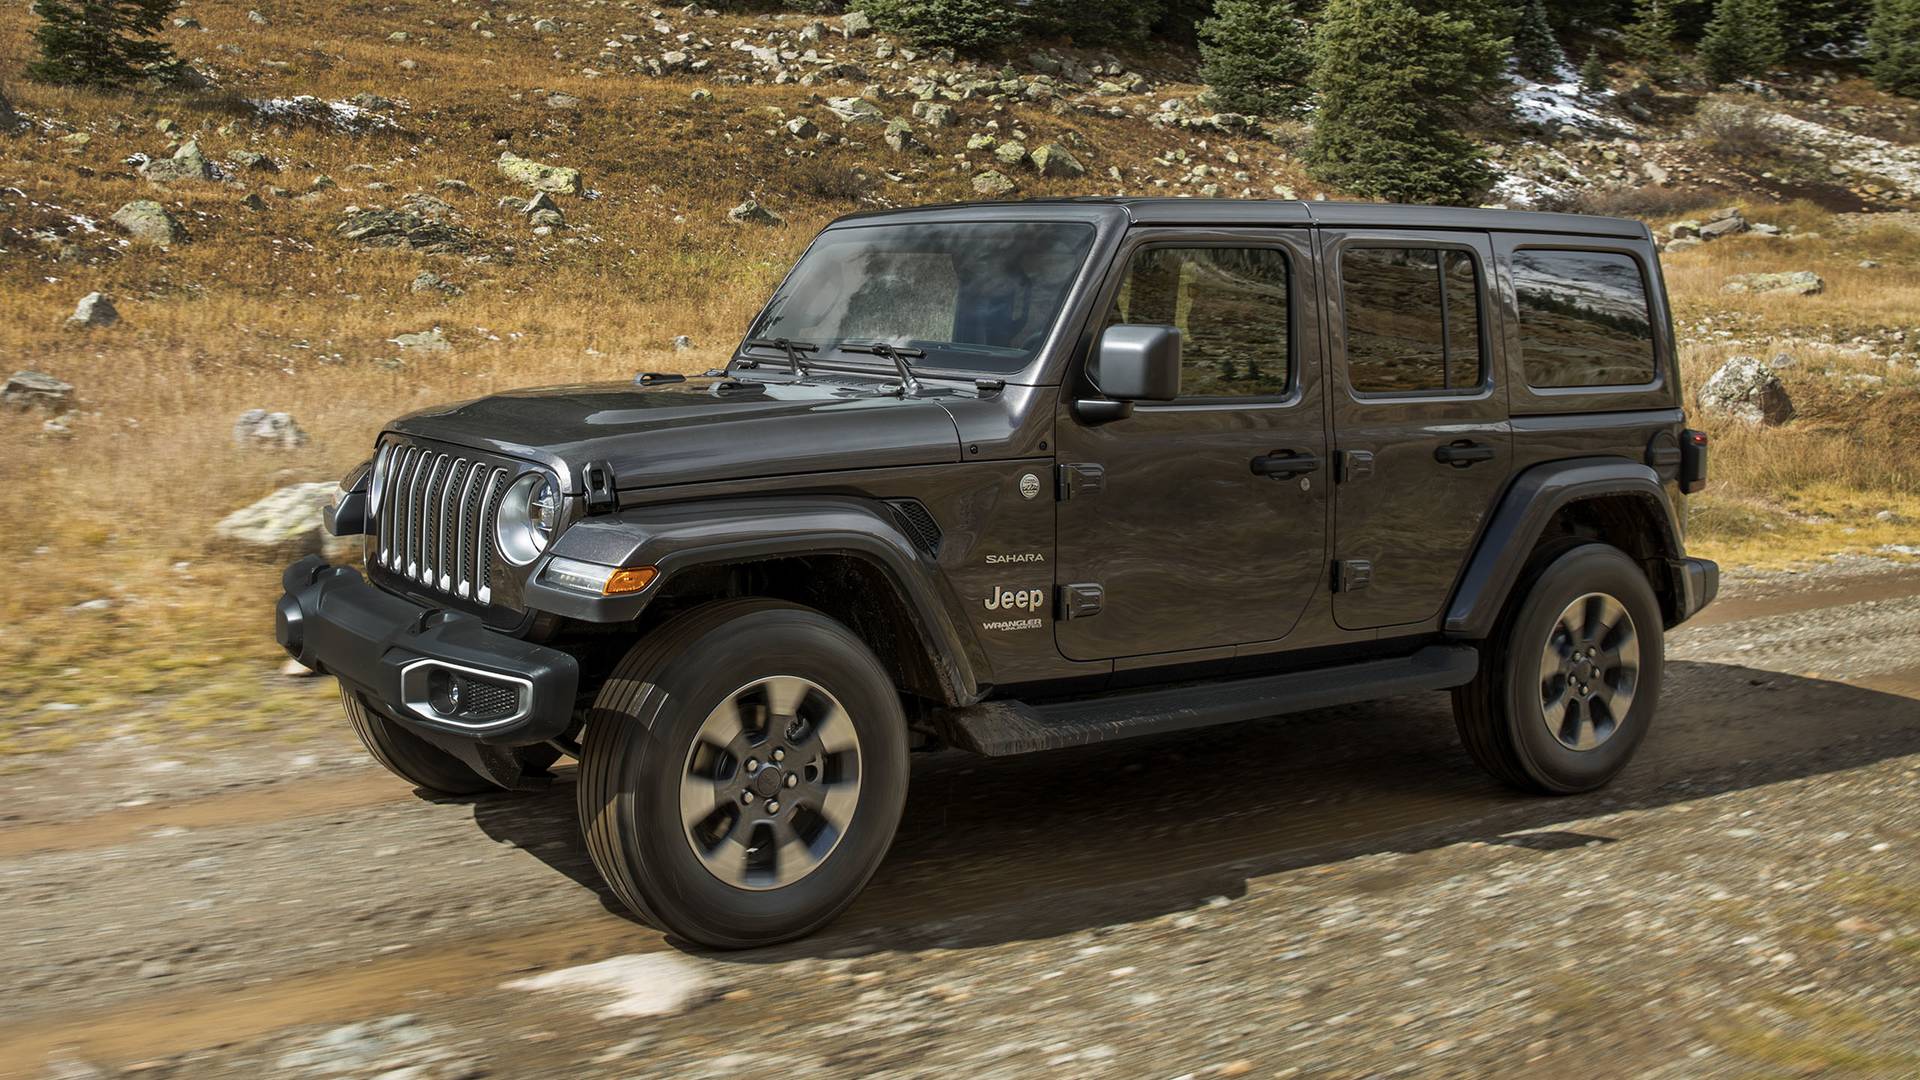 Jeep Wrangler Diesel Option Will Cost $000